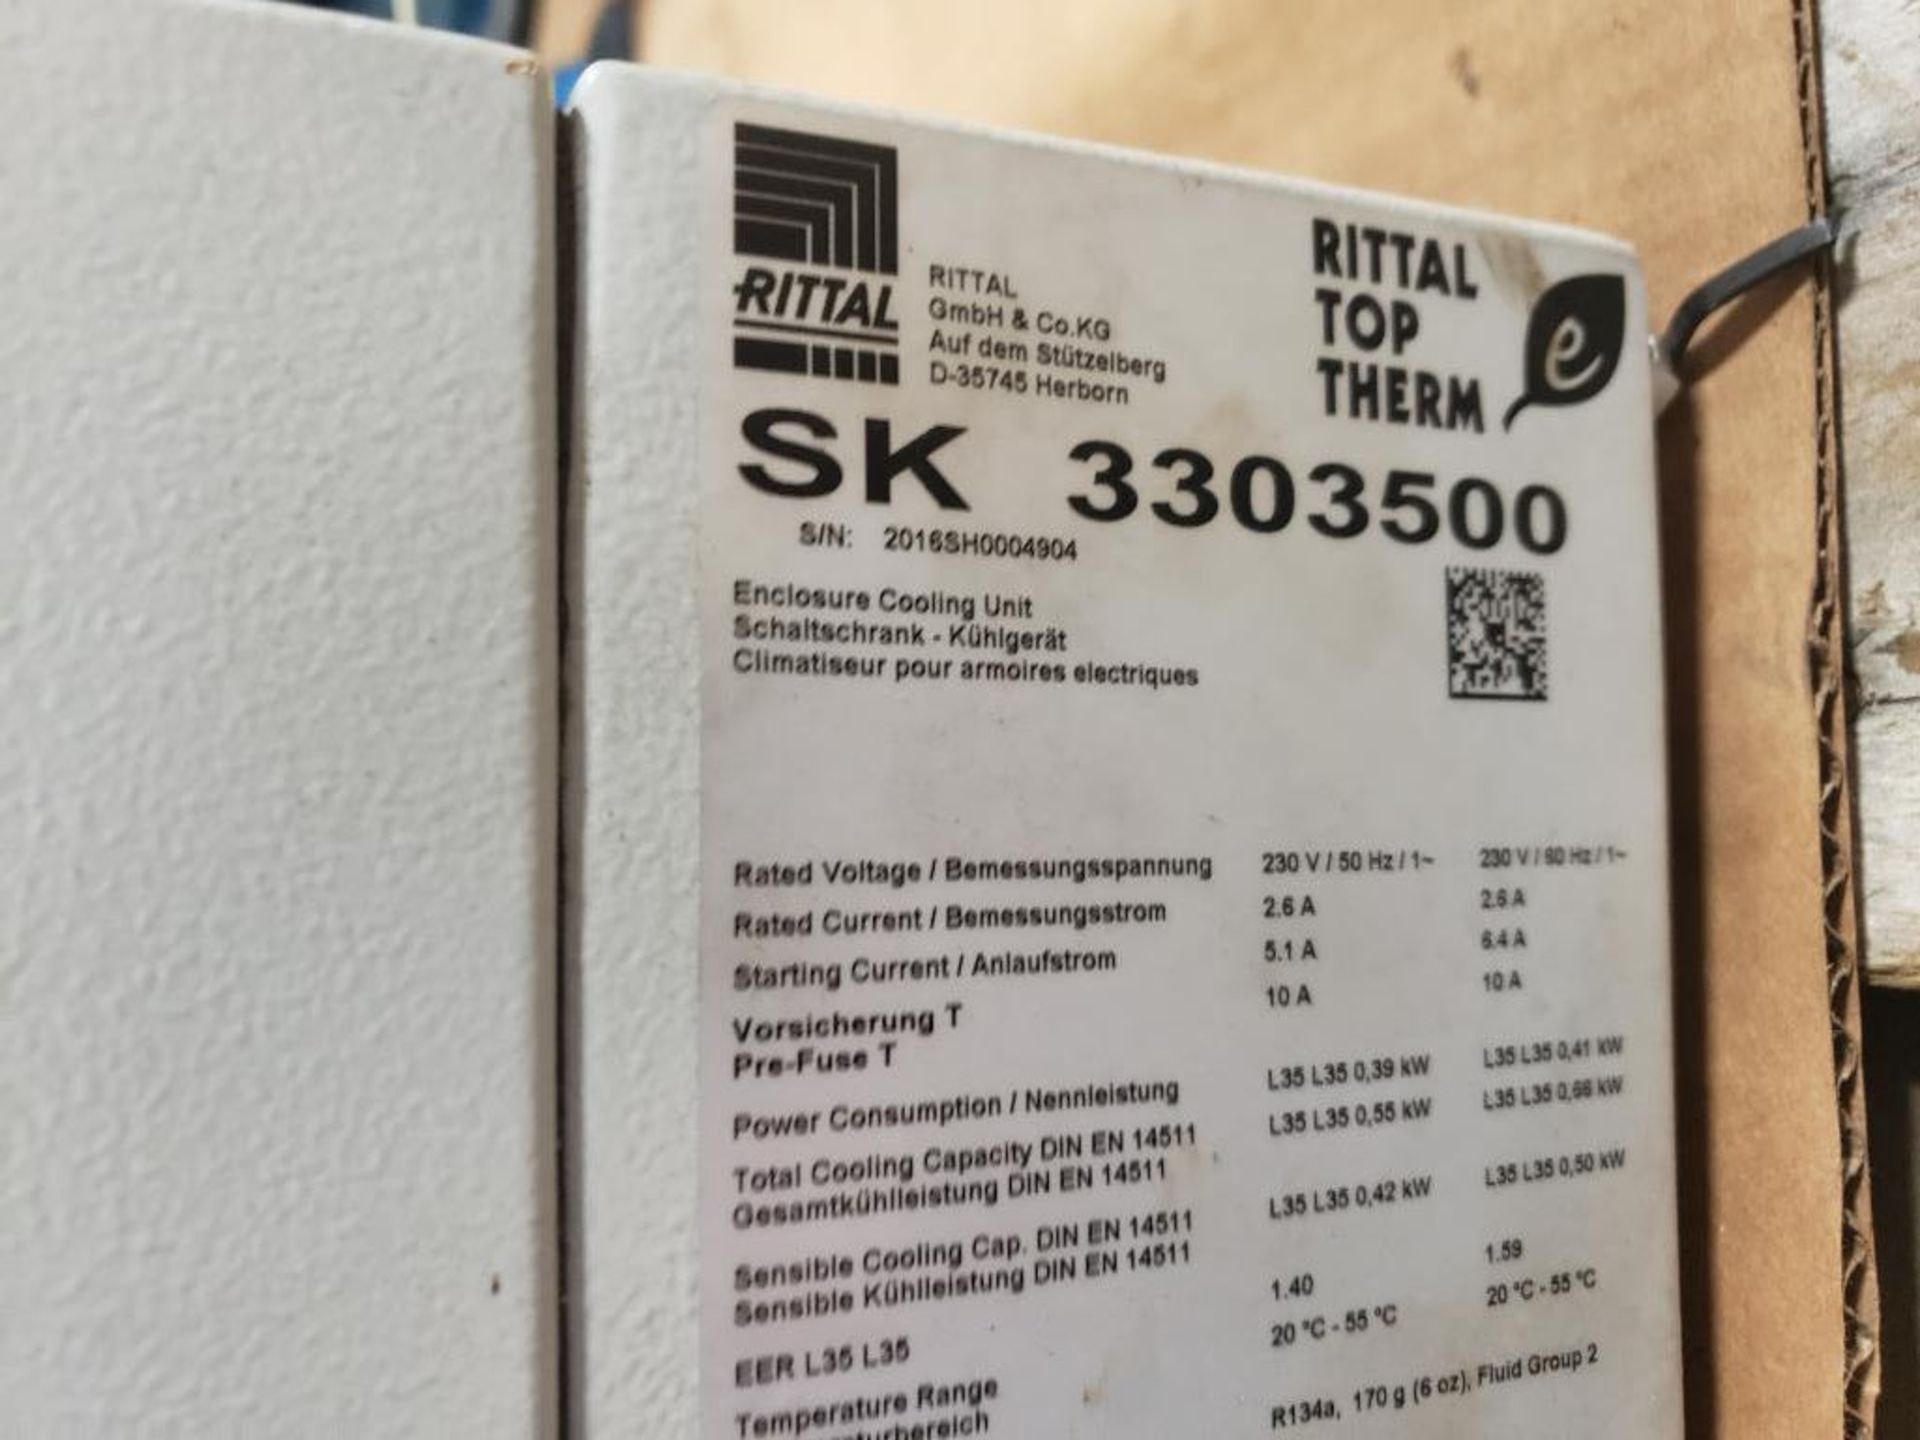 Rittal top therm SK-3303500 enclosure cooling unit. - Image 5 of 7